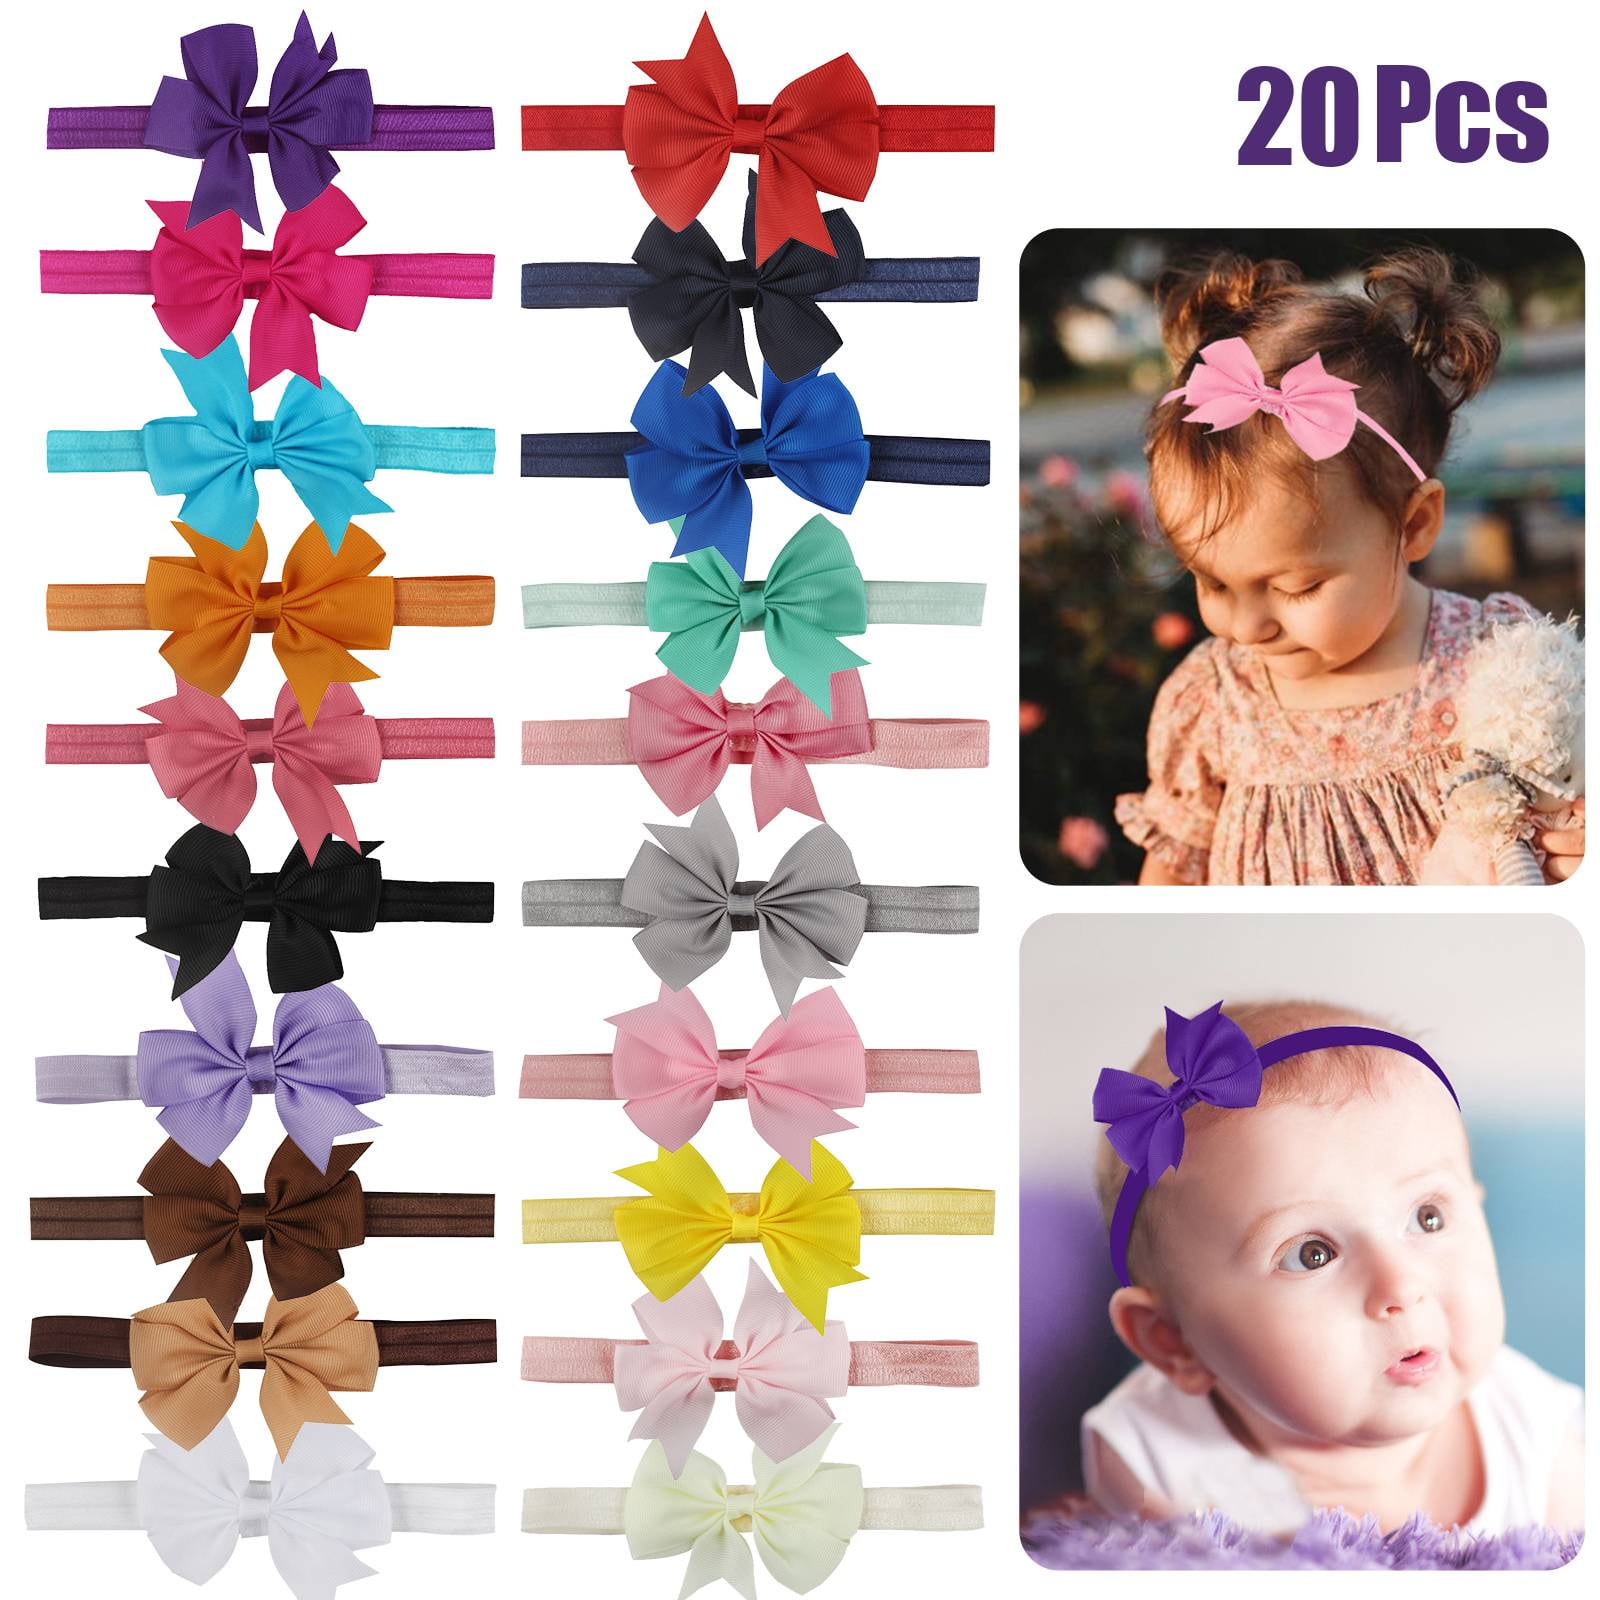 10PCS Baby Girl toddlers hairband Hair Bows Clips with elastic headbands _C 